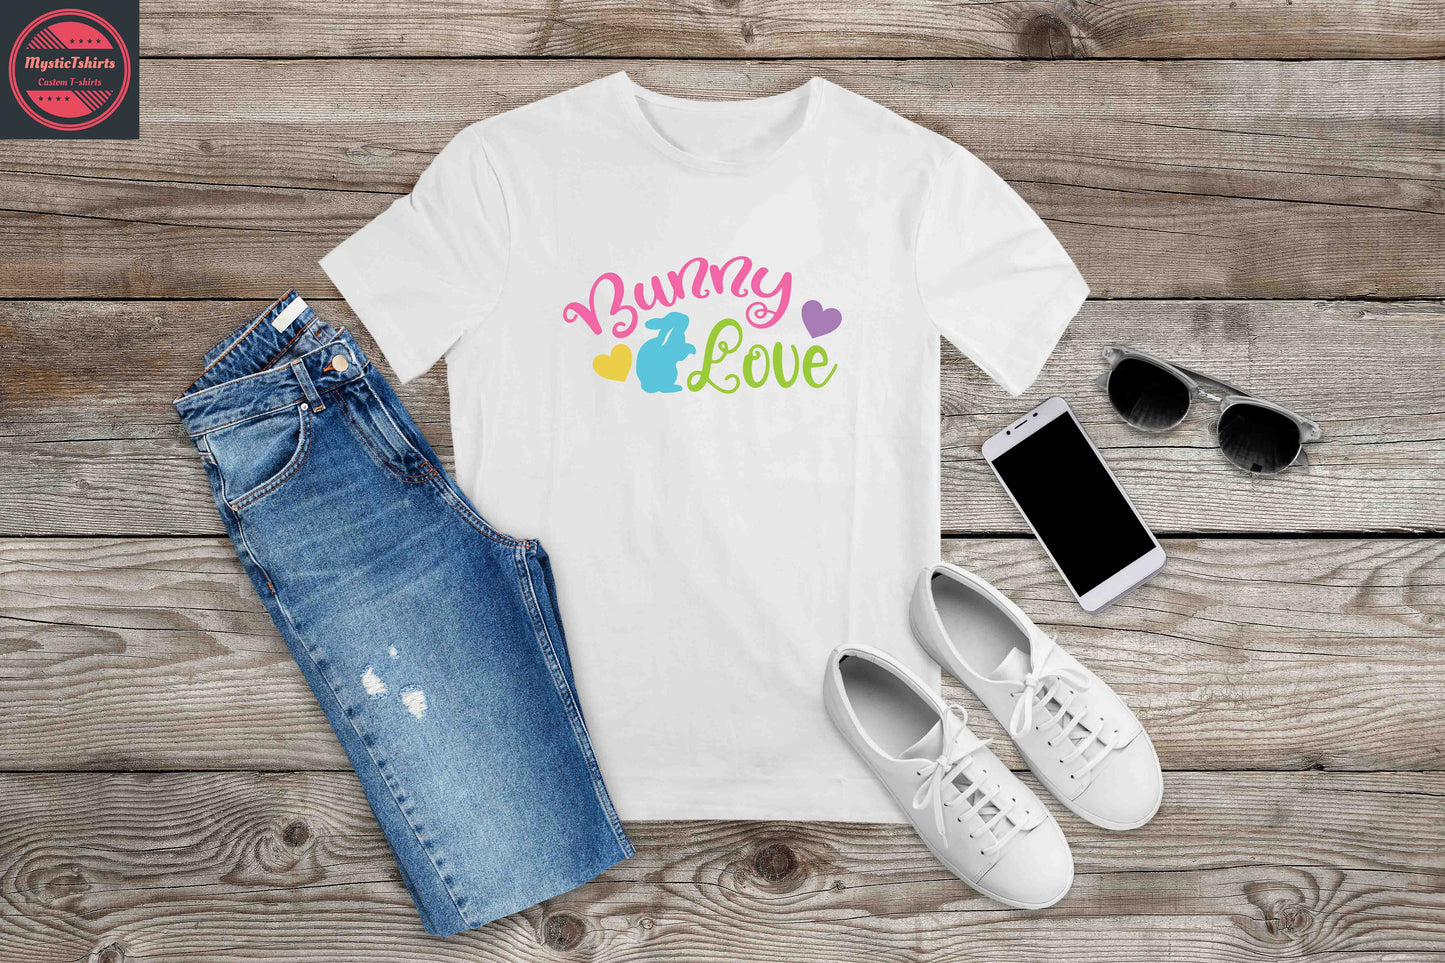 043. BUNNY LOVE, Custom Made Shirt, Personalized T-Shirt, Custom Text, Make Your Own Shirt, Custom Tee